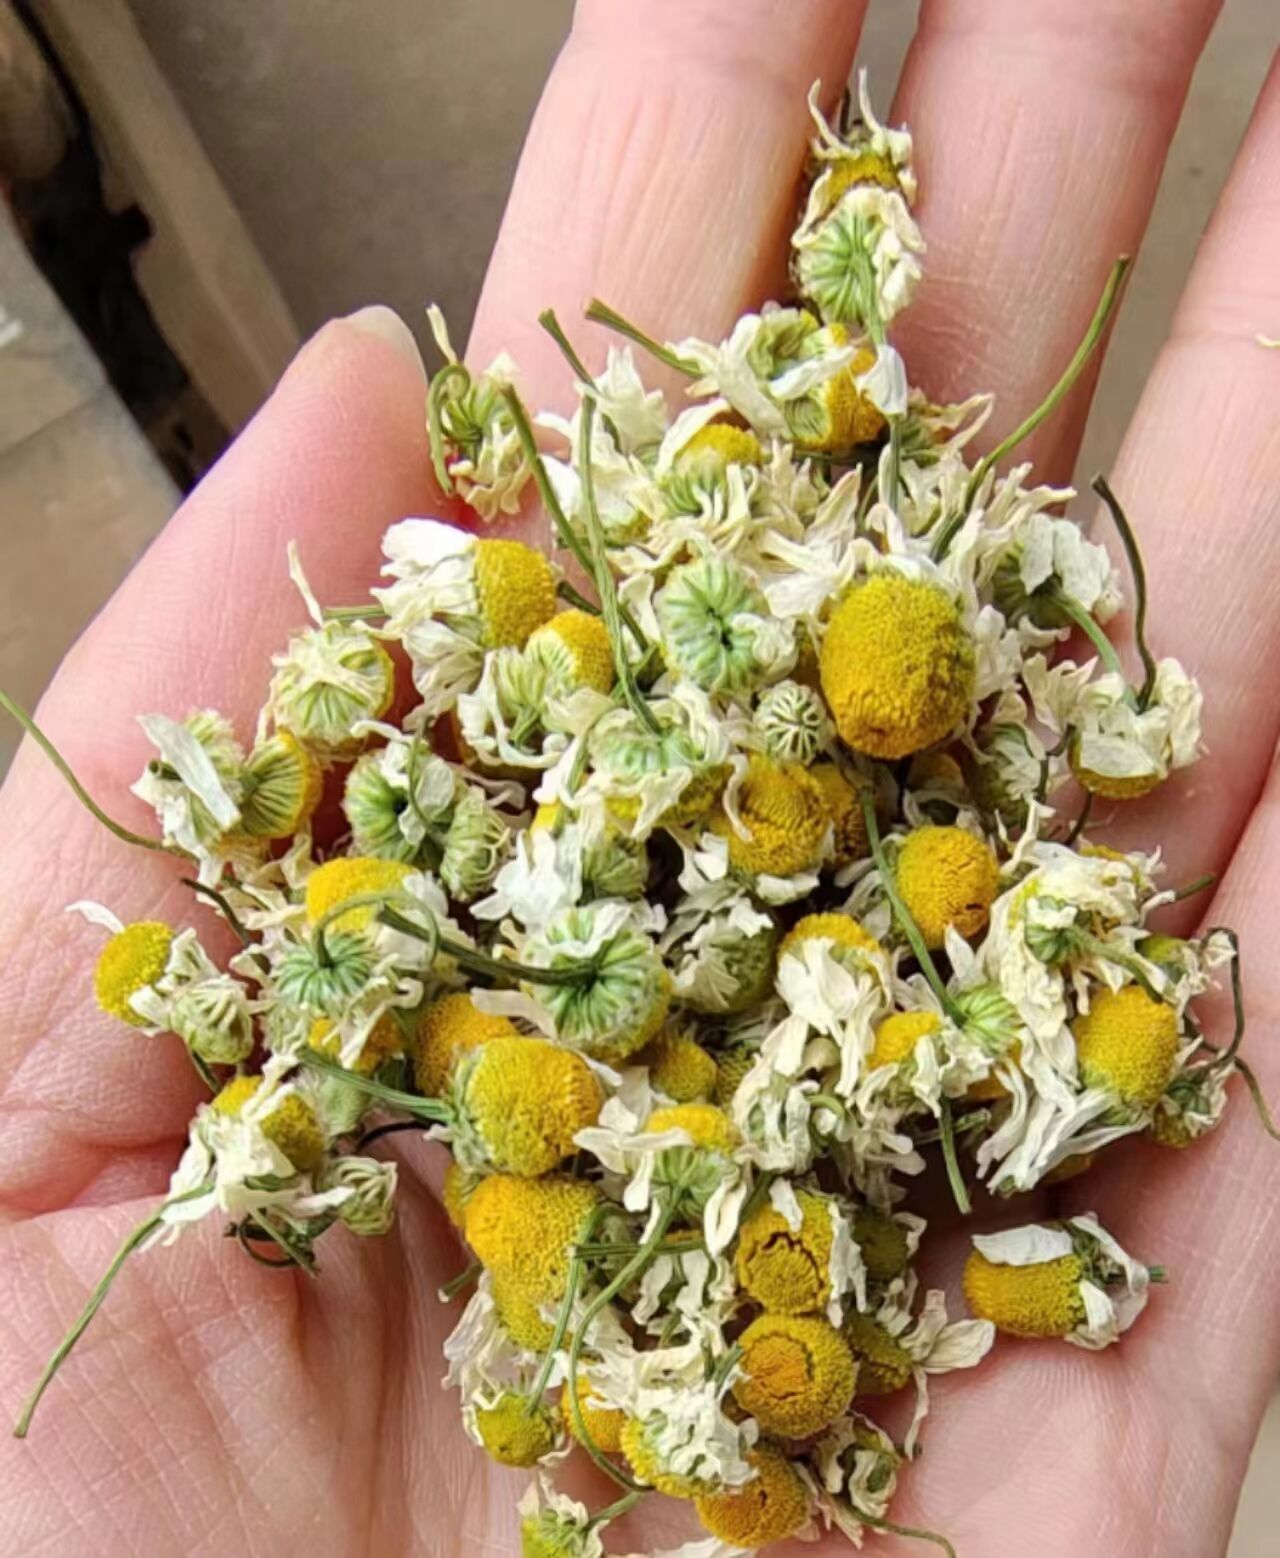 Botanical Extract Supplier Chamomile Display